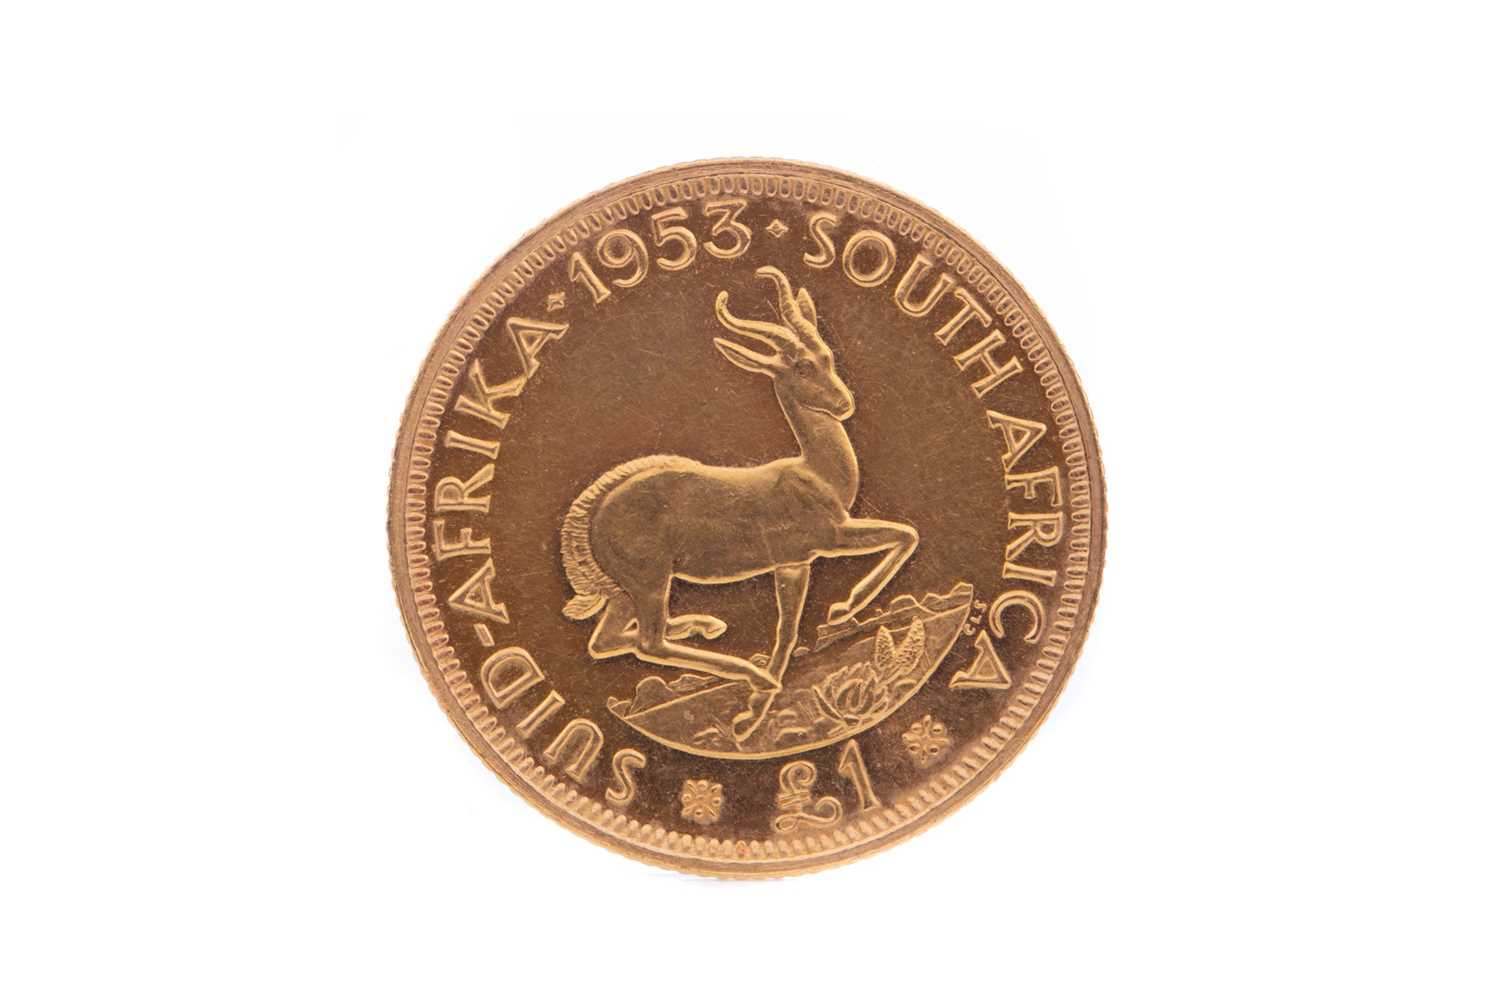 Lot 64 - A GOLD £1 ONE POUND SOUTH AFRICAN COIN DATED 1953